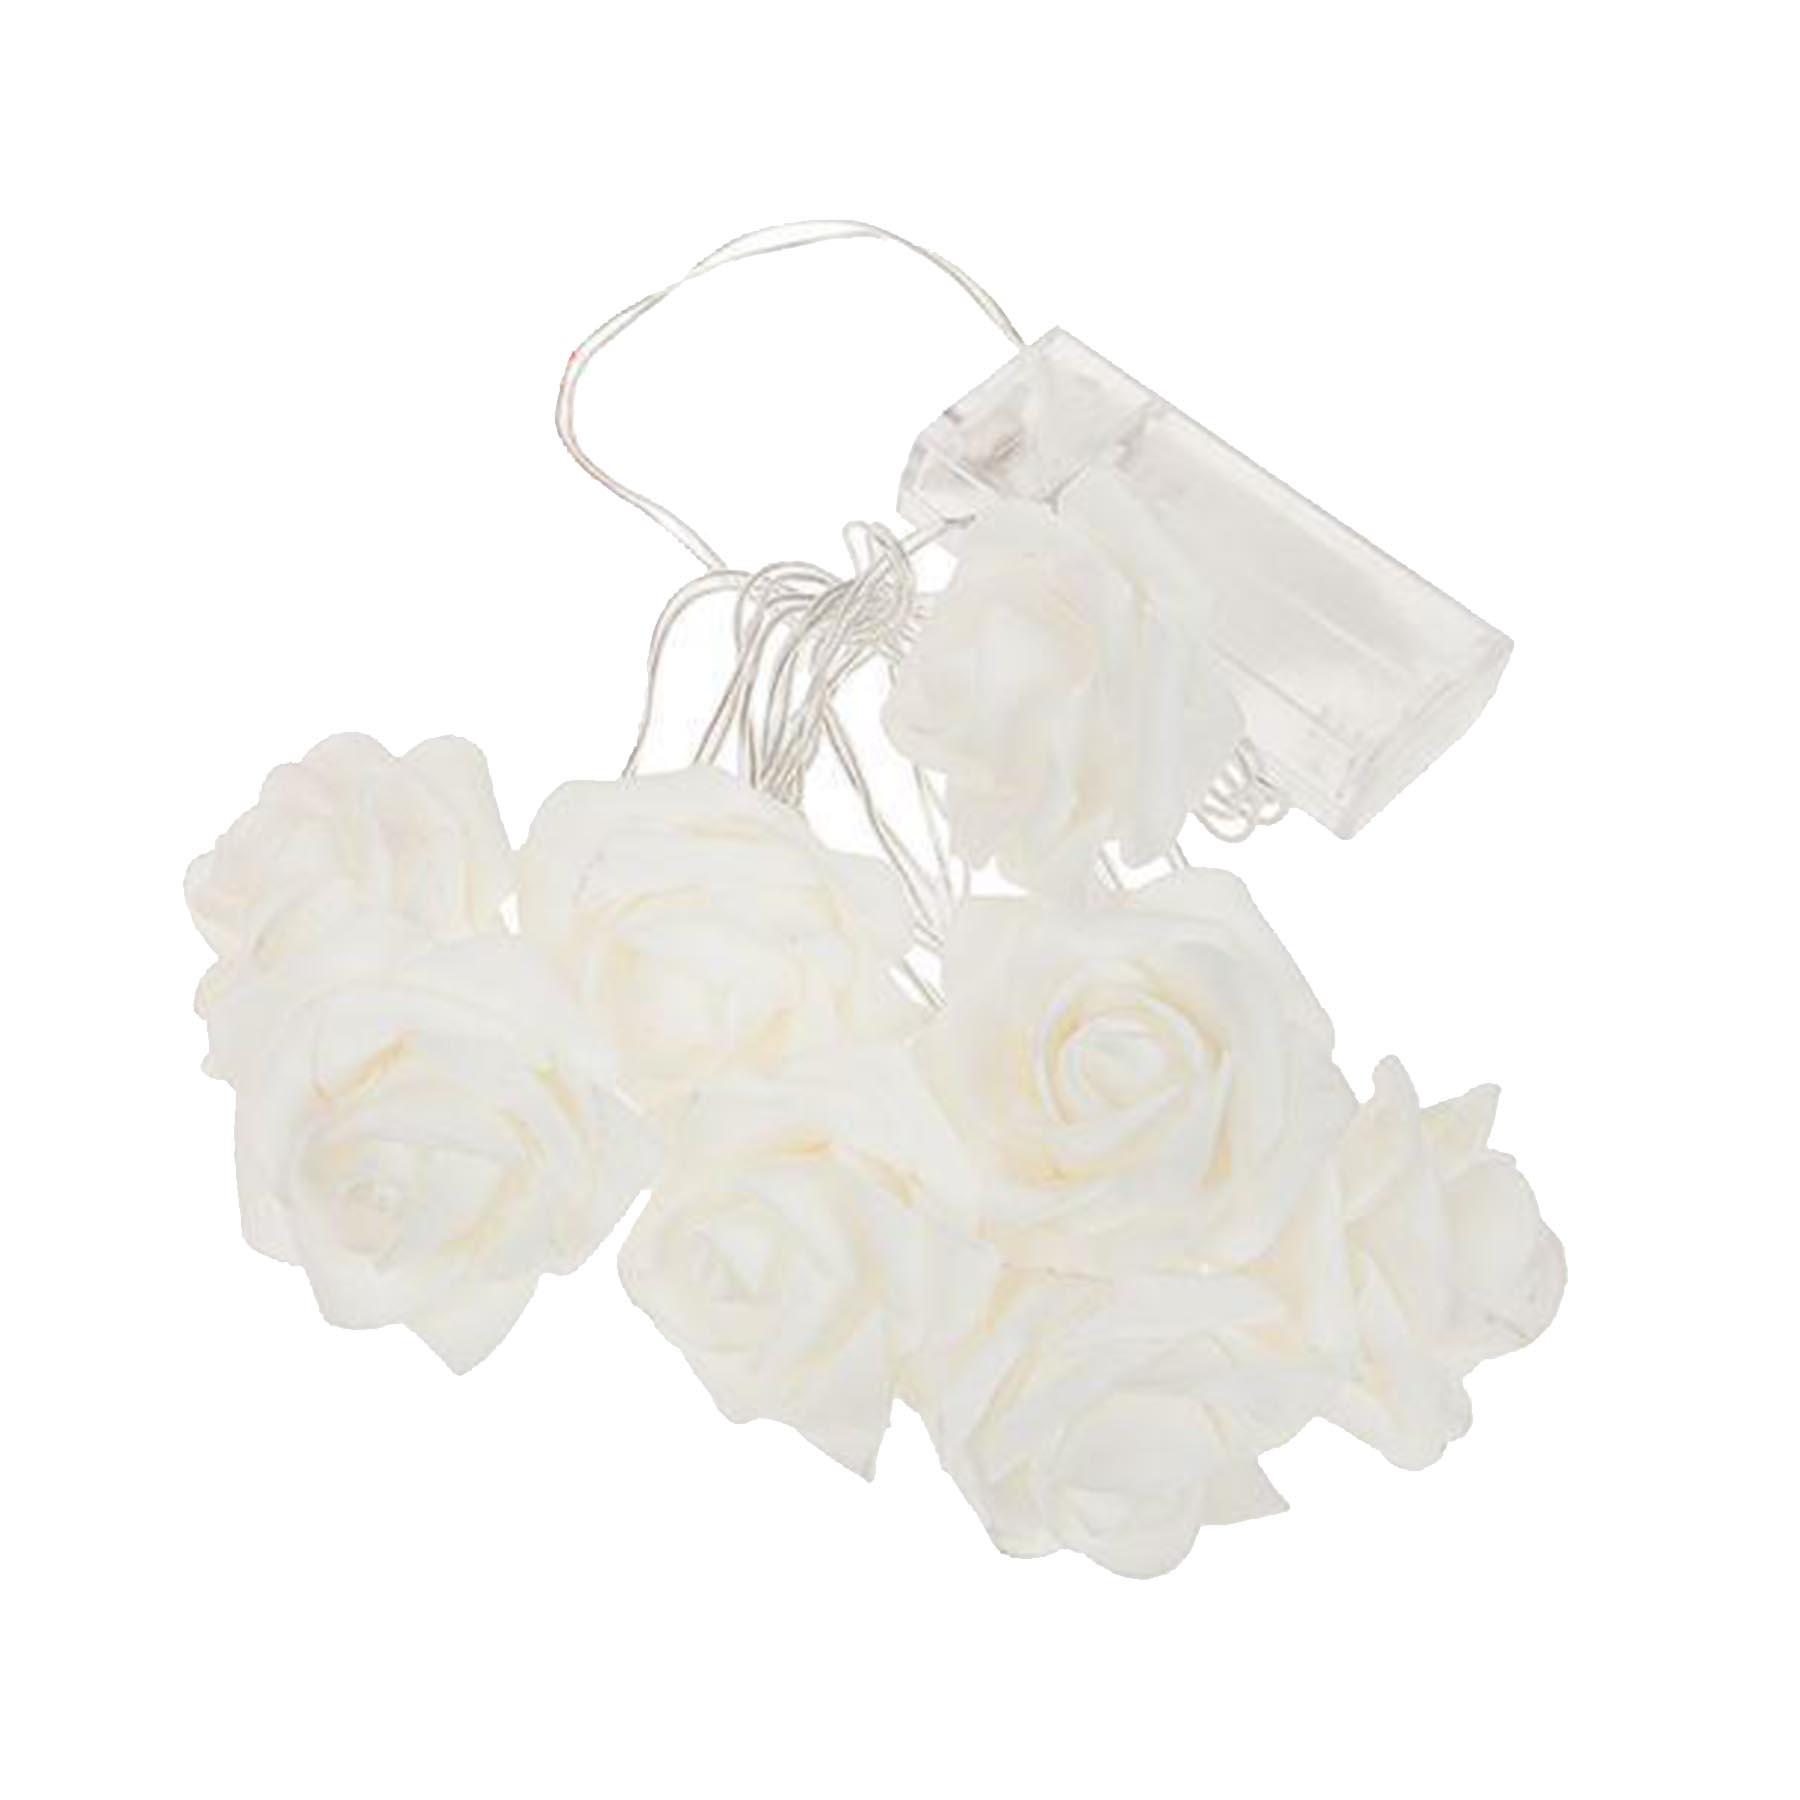 8 Pack Artificial Foam White Rose Battery String Lights Wedding Valentines Day